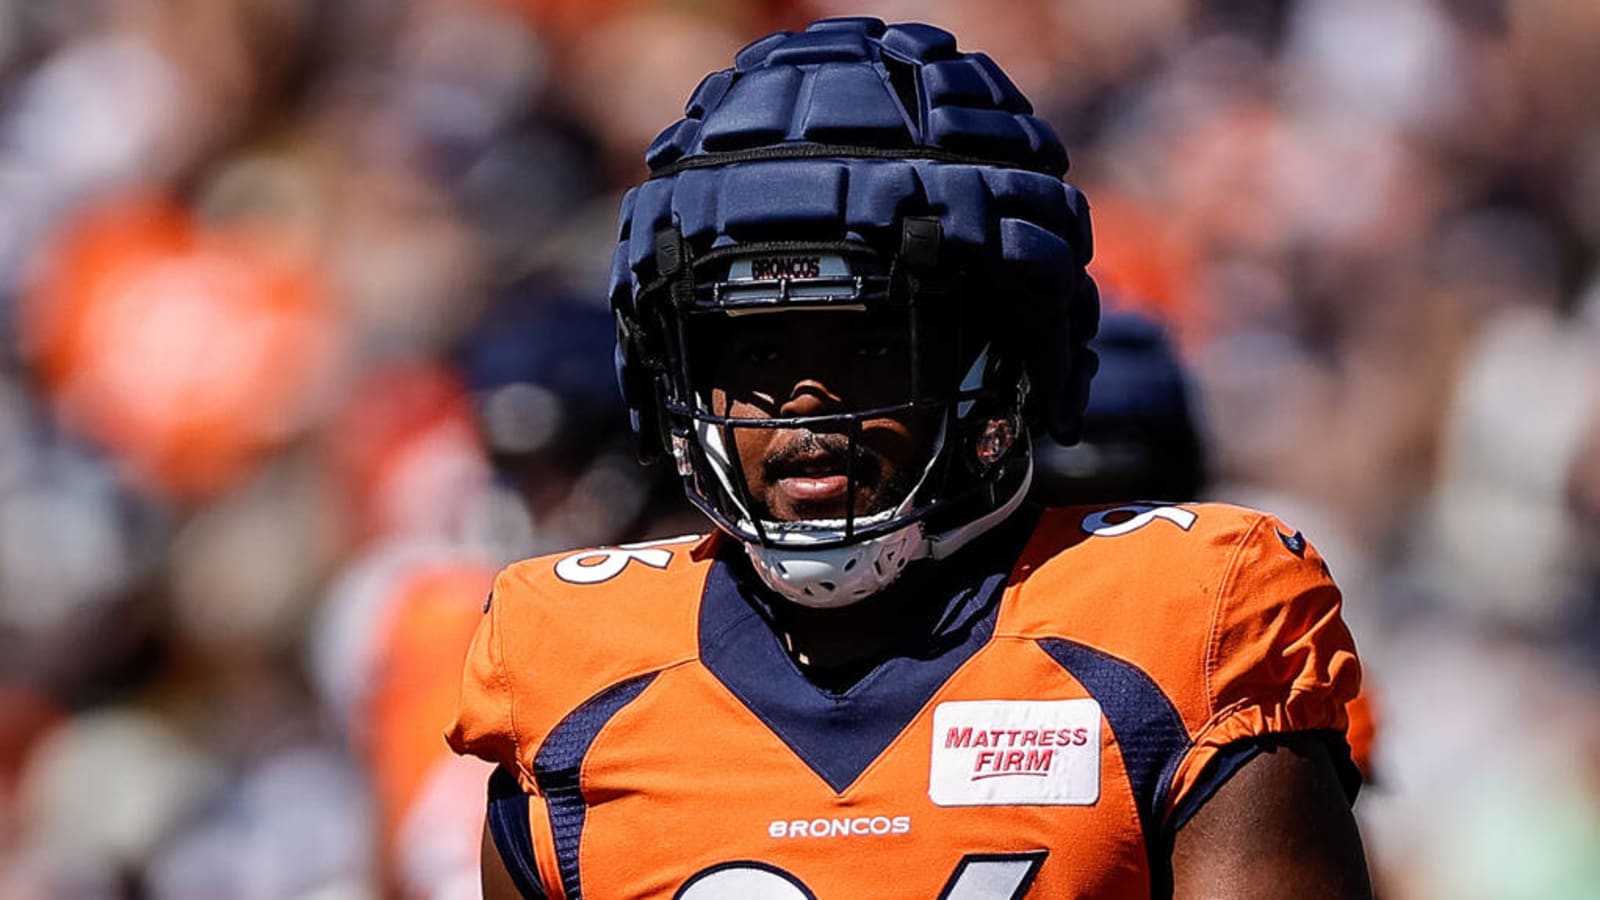 Broncos DT latest player to receive suspension for betting